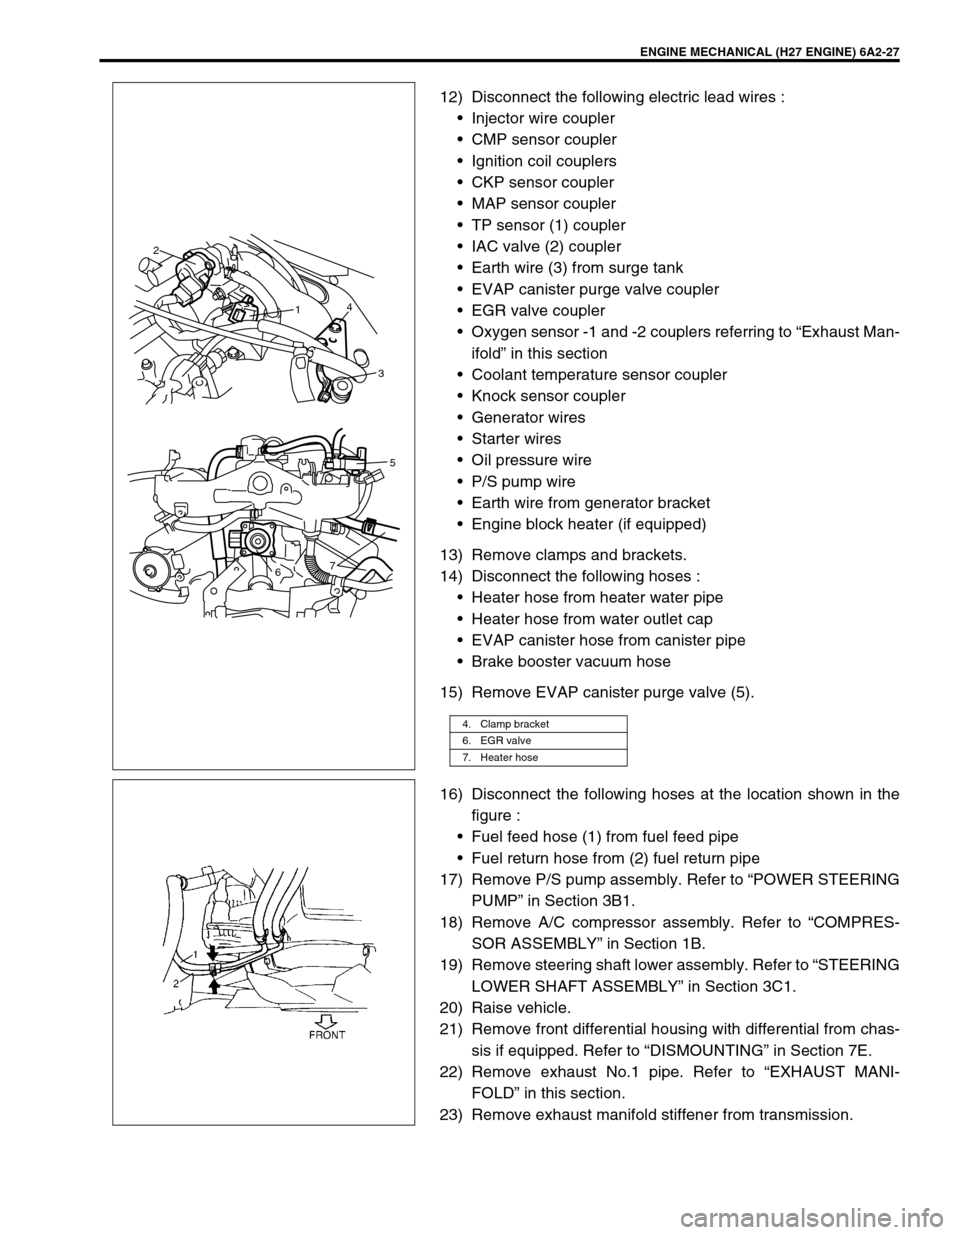 SUZUKI GRAND VITARA 2001 2.G Owners Guide ENGINE MECHANICAL (H27 ENGINE) 6A2-27
12) Disconnect the following electric lead wires :
•Injector wire coupler
•CMP sensor coupler
•Ignition coil couplers
•CKP sensor coupler
•MAP sensor co